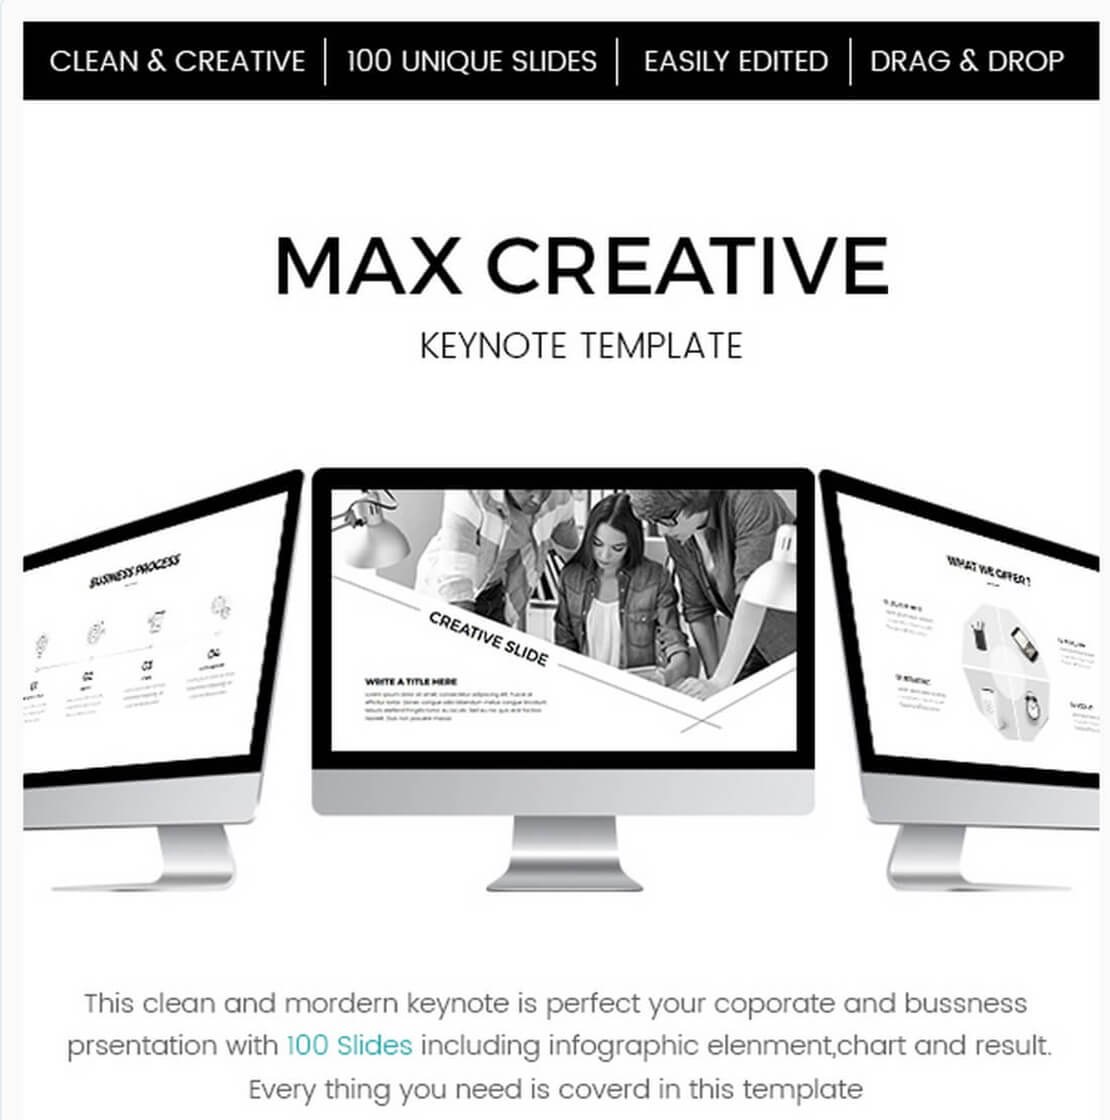 max creative For Best Keynote Template